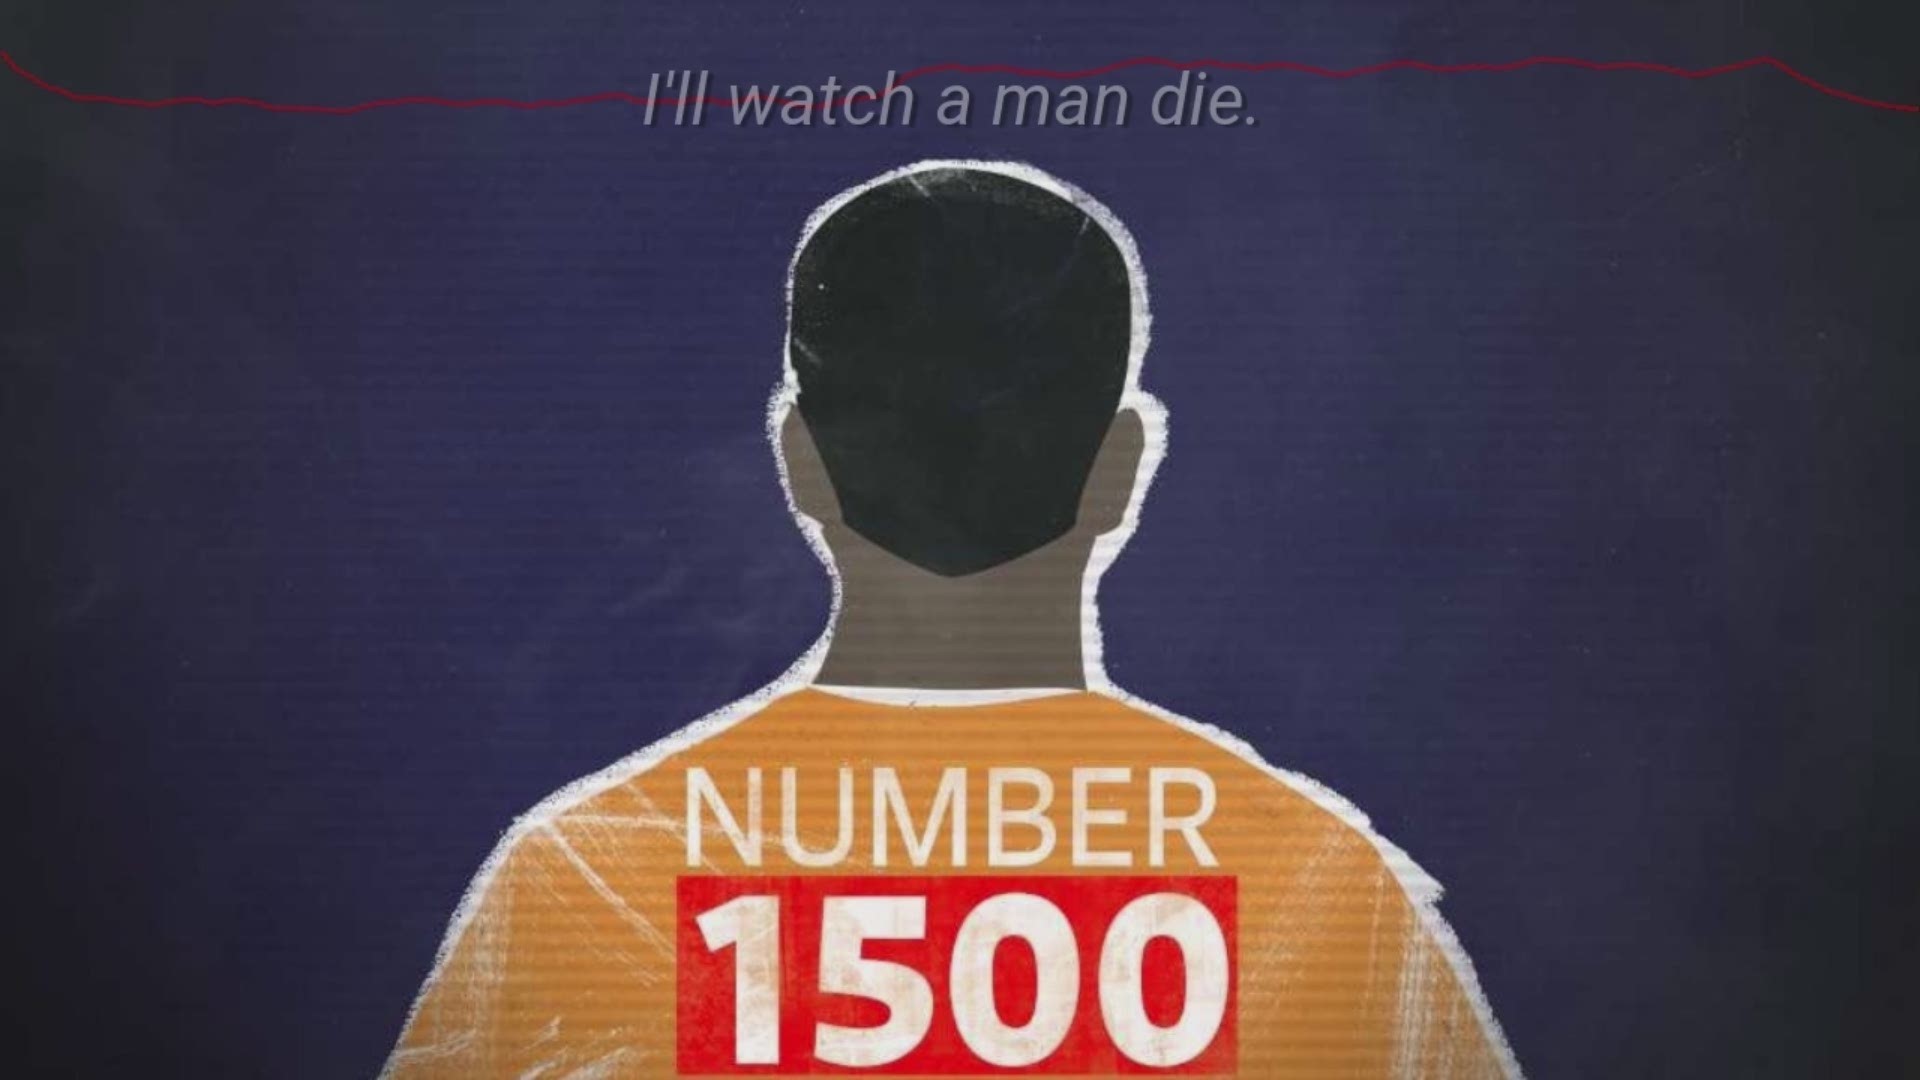 The new podcast, Number 1500: About to be Free, follows a journalist's journey as he and a team of investigators learn all they can about the crime, the man being executed, the victim and the controversy surrounding the death penalty in America.